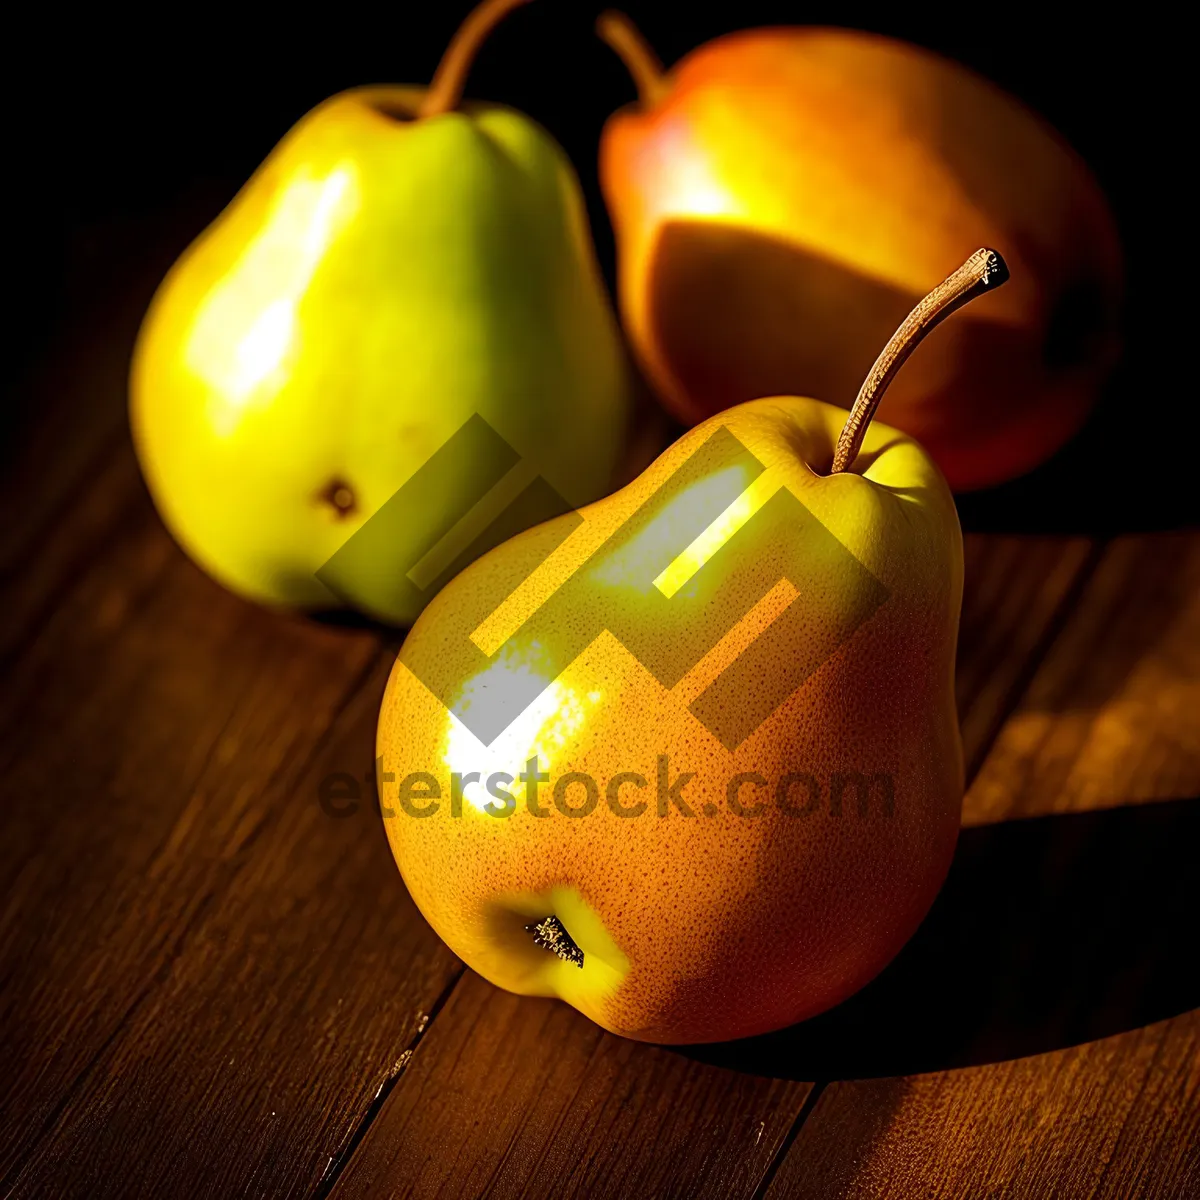 Picture of Golden Delicious Apple - Fresh, Healthy, and Delicious Fruit